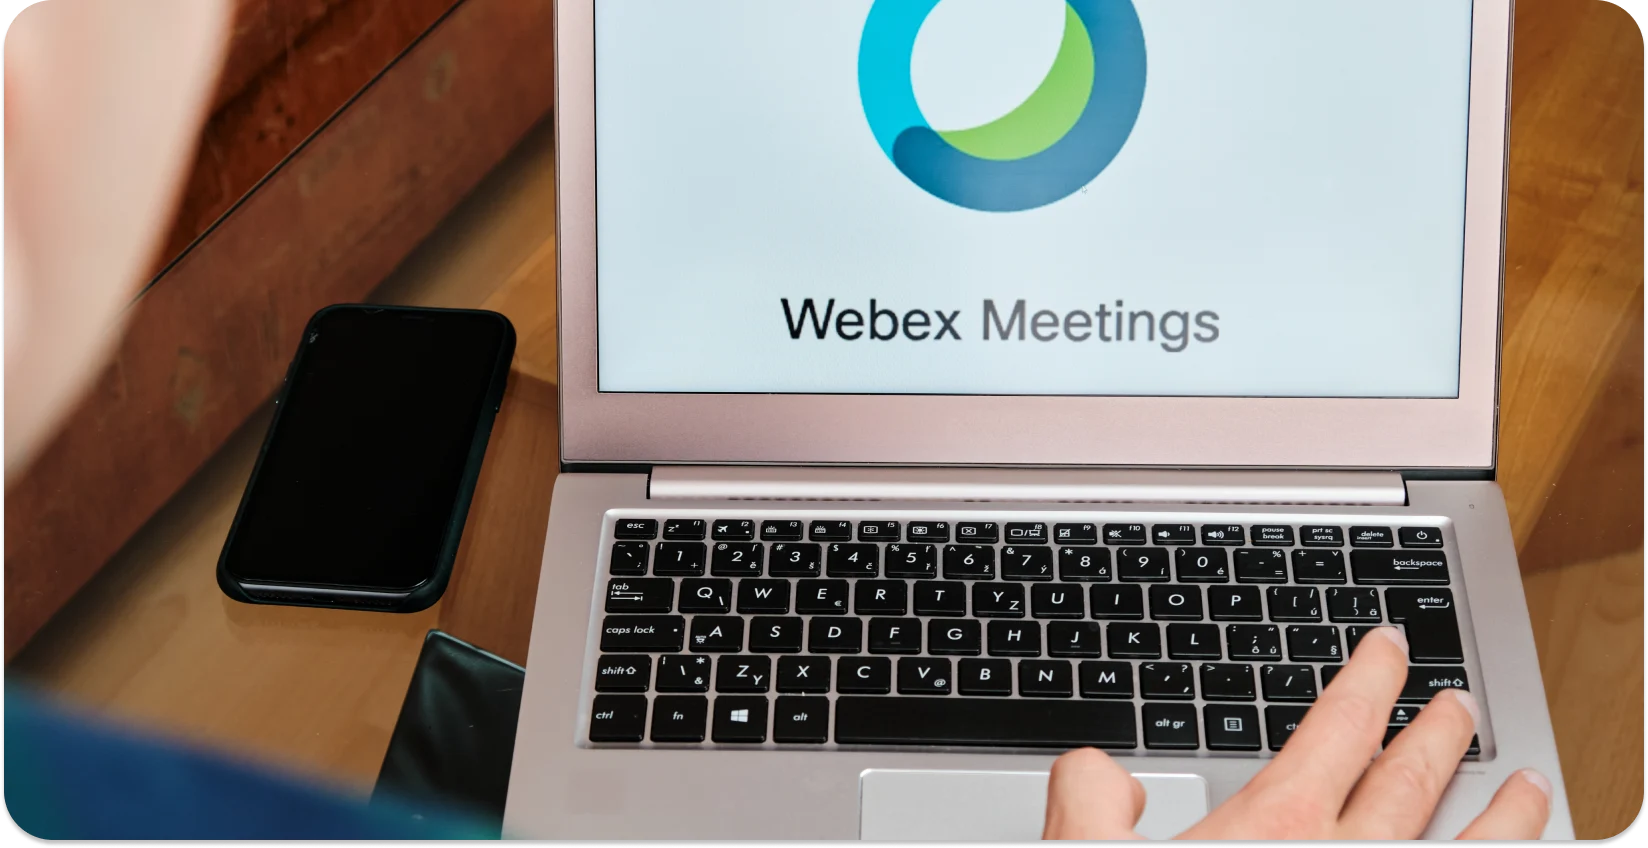 A person starting a Webex meeting on a laptop, ready for automatic transcription.